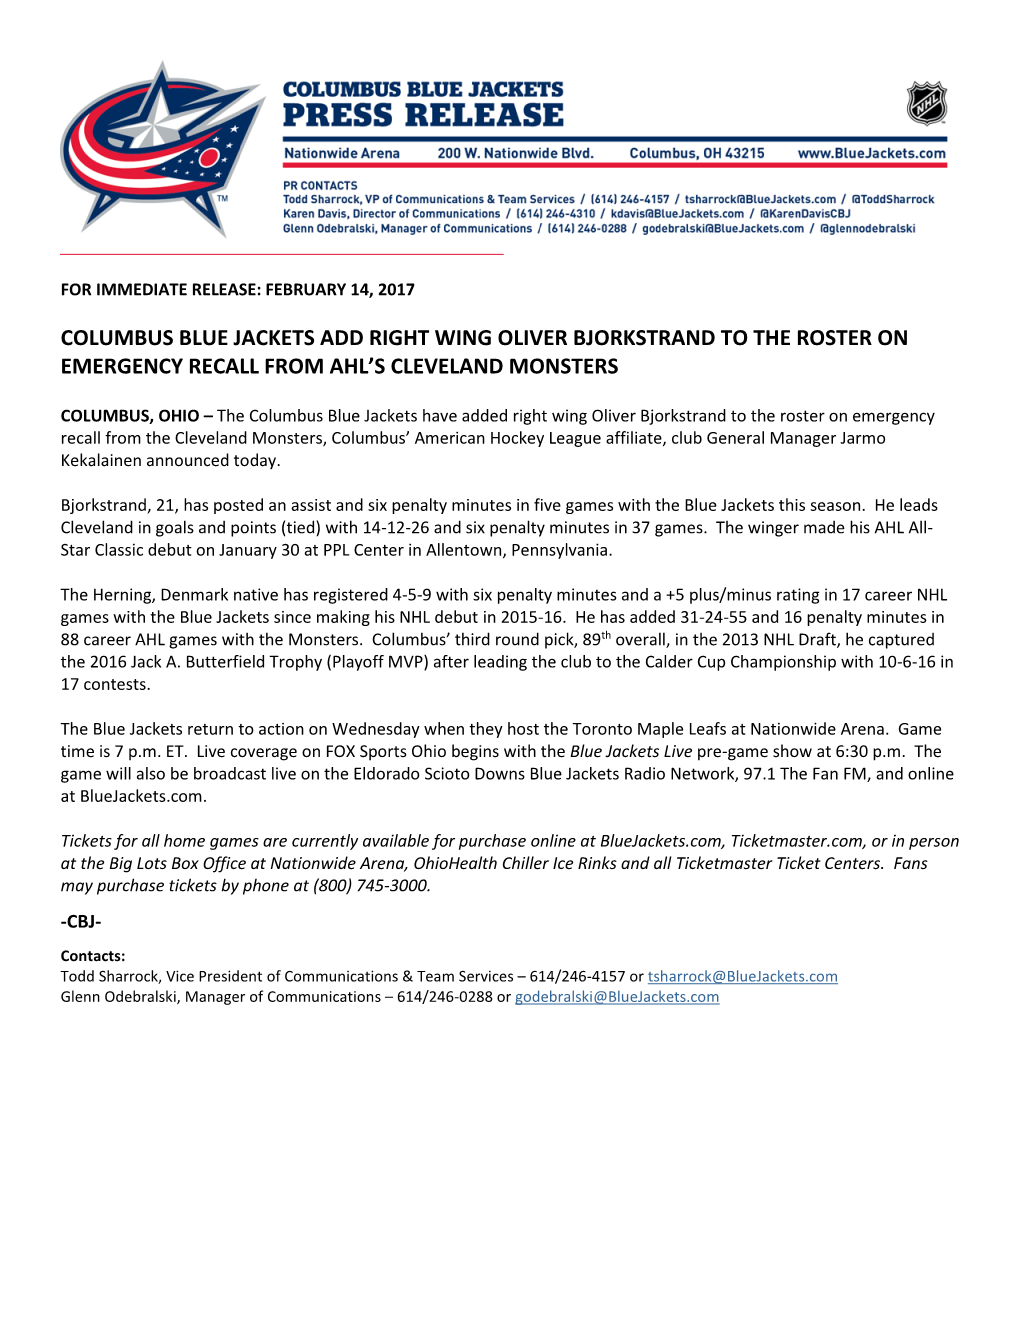 Columbus Blue Jackets Add Right Wing Oliver Bjorkstrand to the Roster on Emergency Recall from Ahl’S Cleveland Monsters